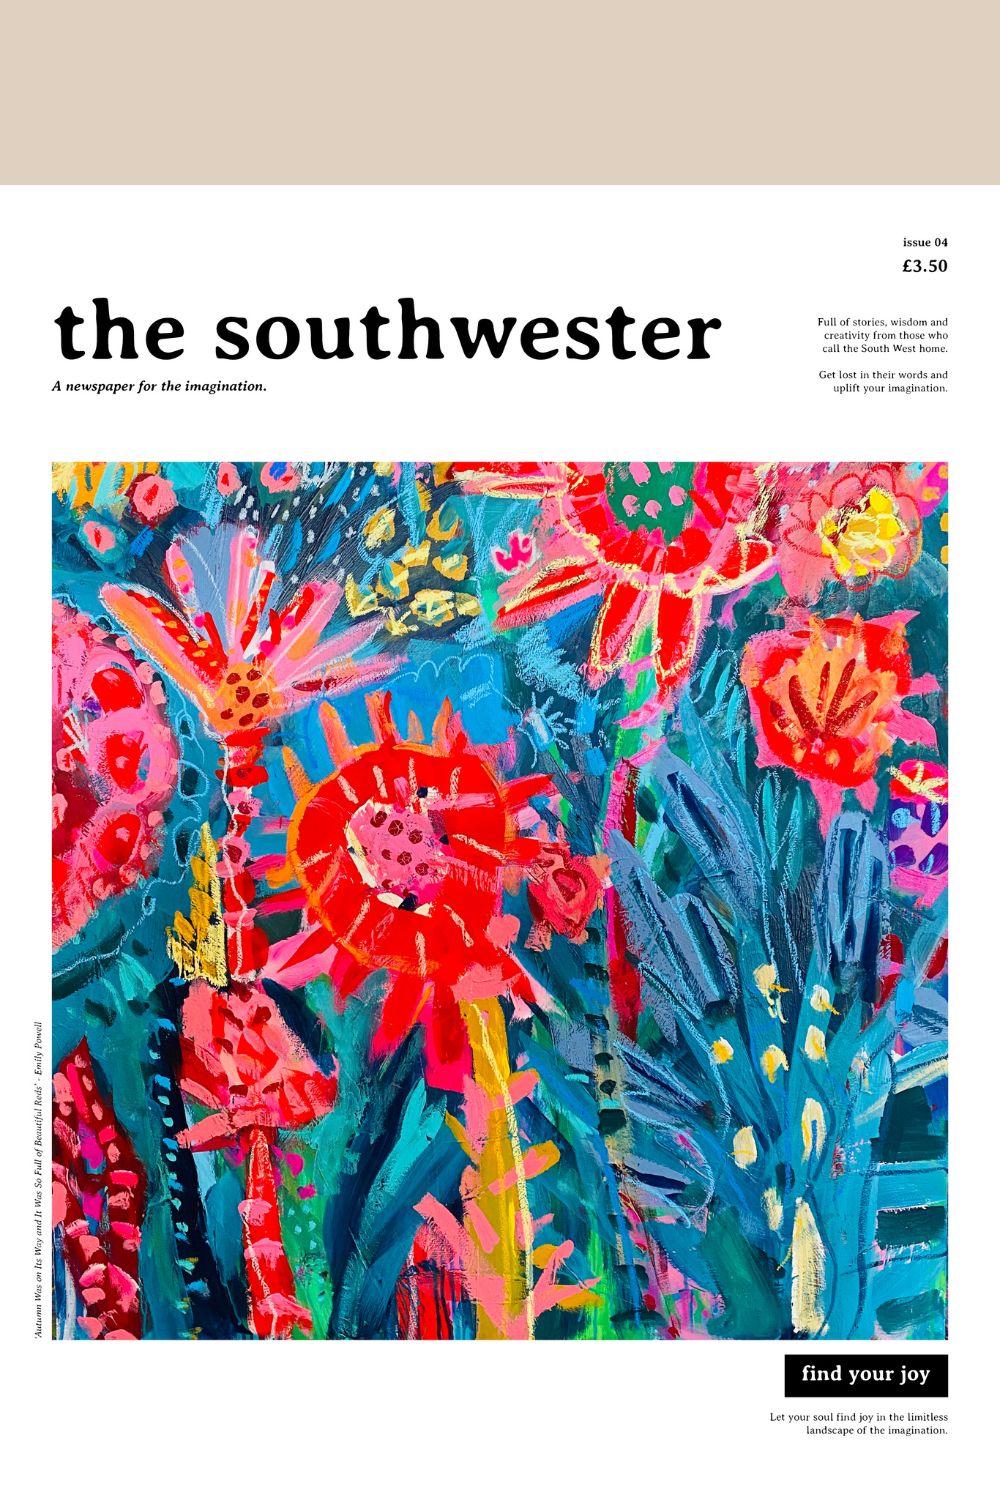 the southwester newspaper issue 4 cover